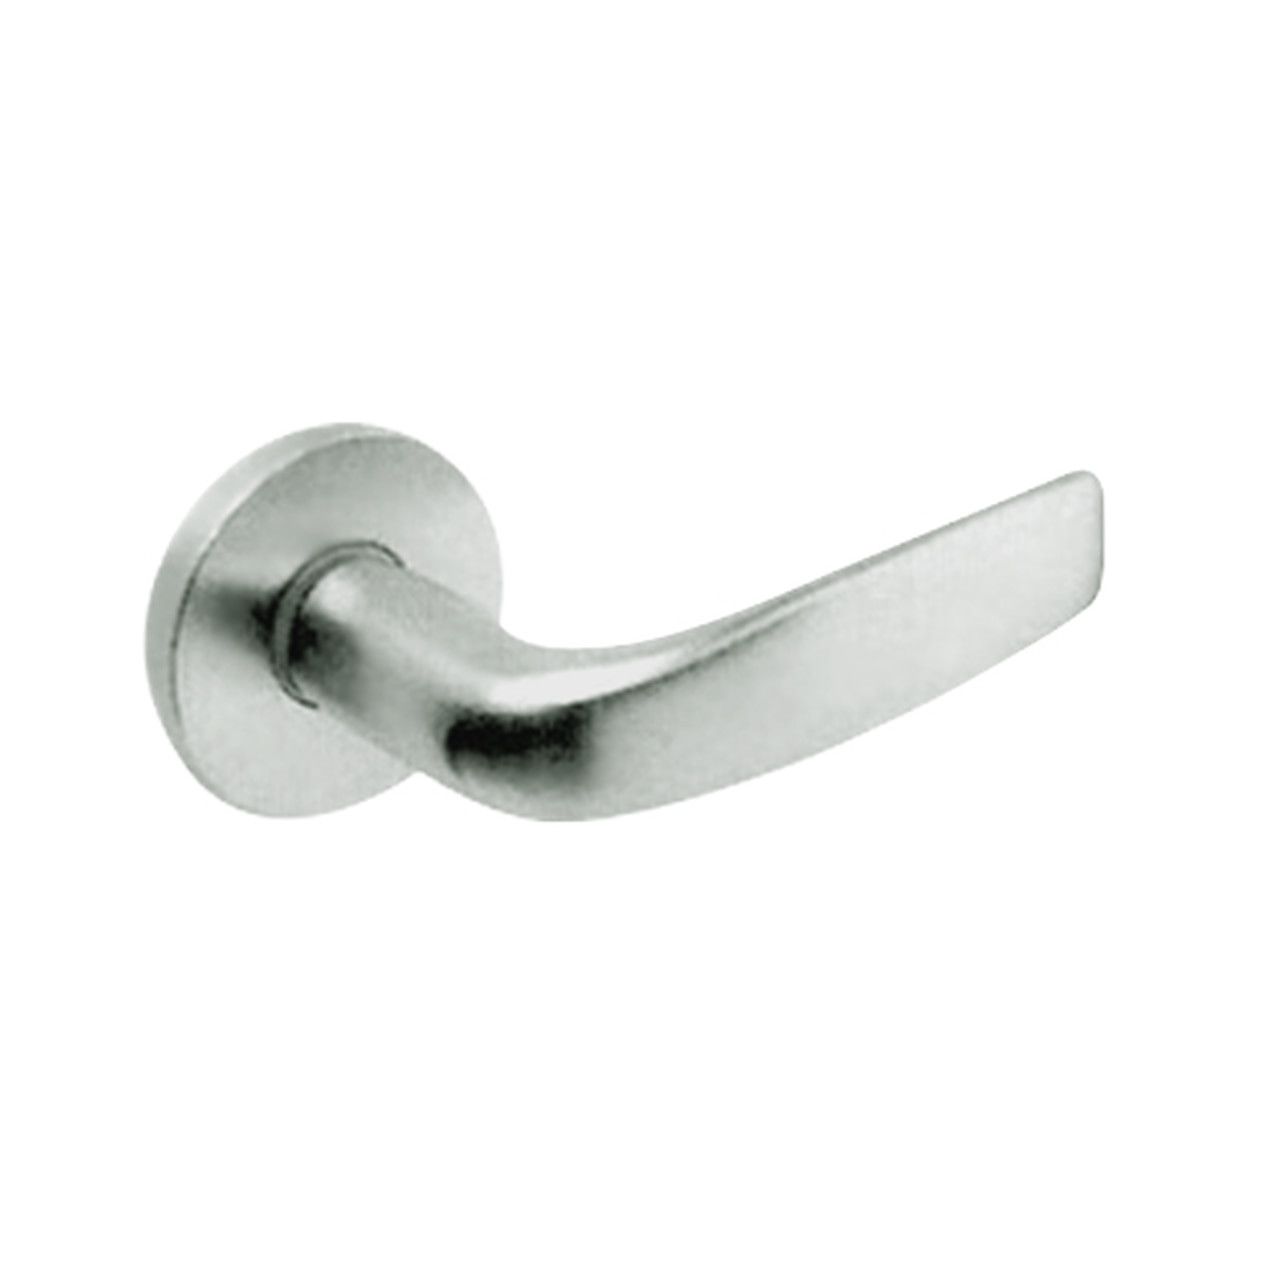 ML2051-CSB-619-M31 Corbin Russwin ML2000 Series Mortise Office Trim Pack with Citation Lever in Satin Nickel